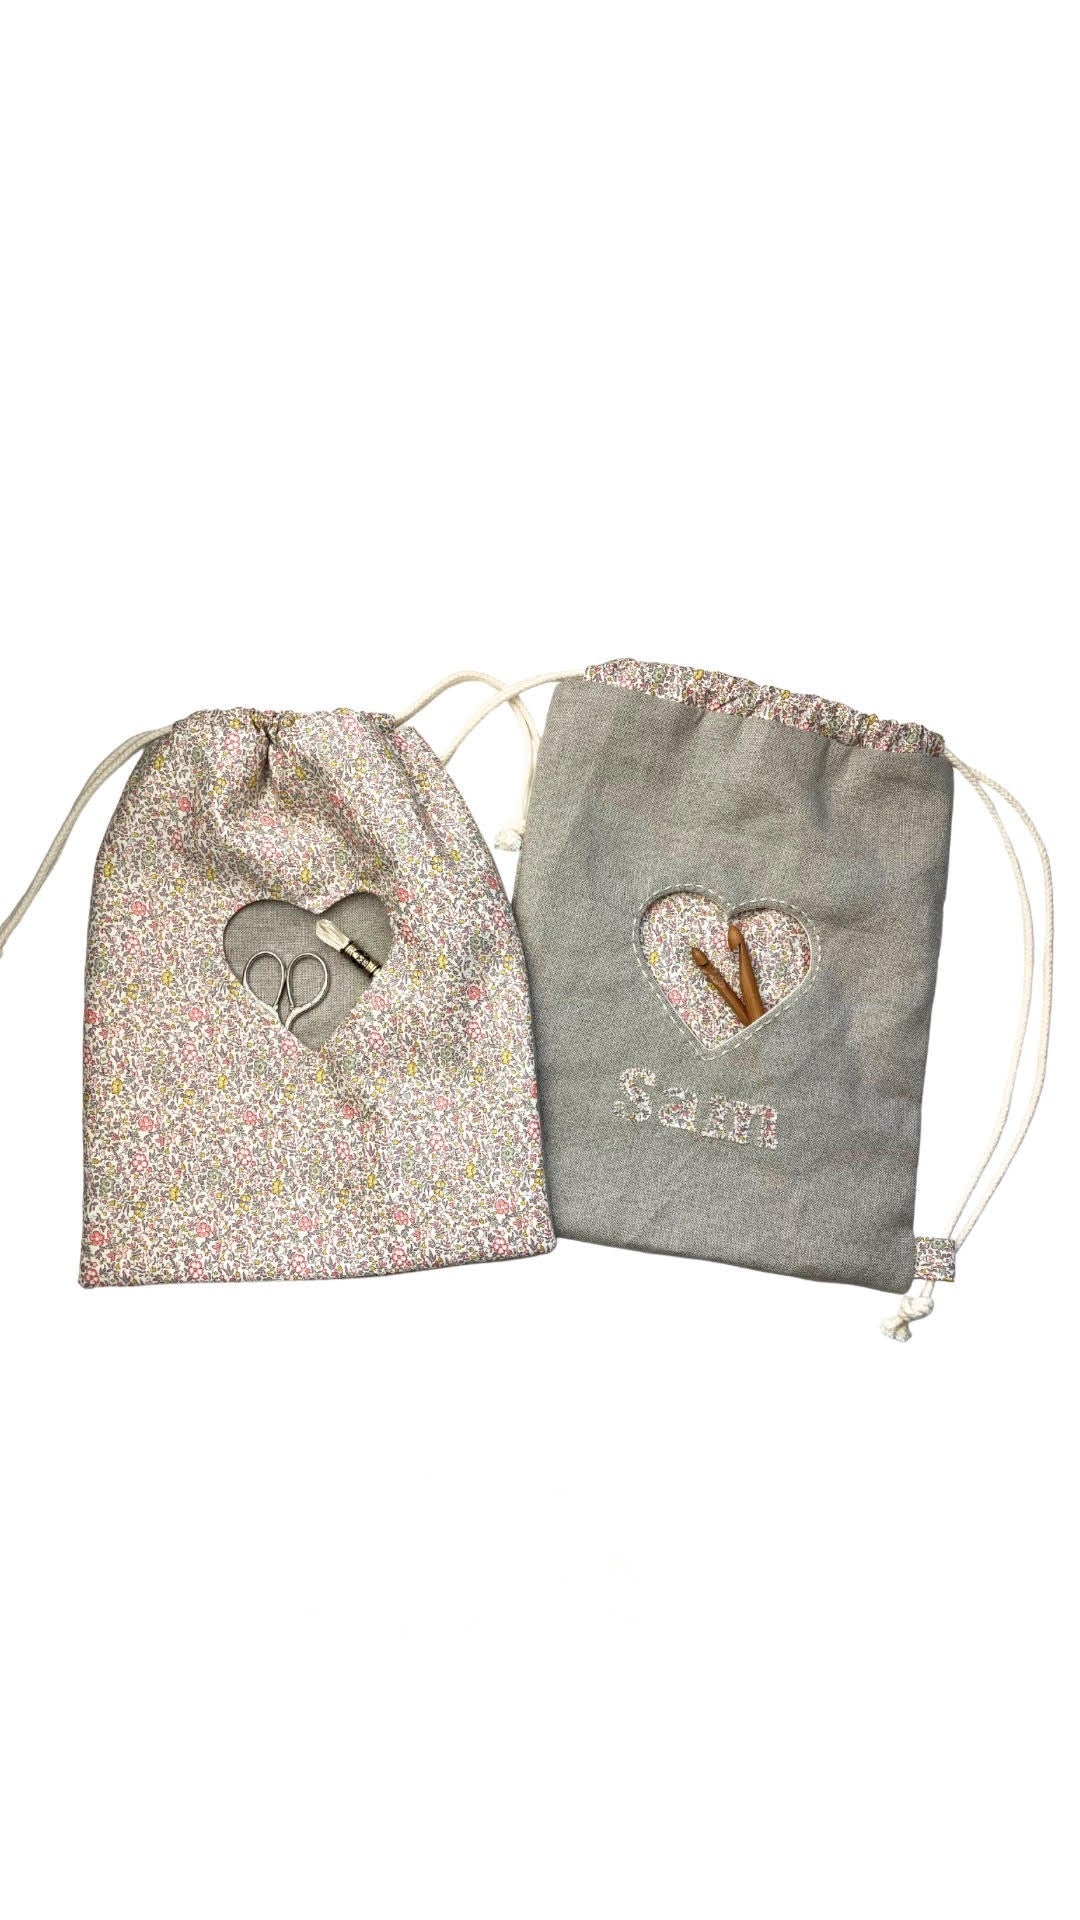 Photo showing the Philo Bag and Mini Backpack sewing pattern from Lasenby on The Fold Line. A drawstring and backpack bag pattern made in canvas, linen, quilting cotton, twill, duck, denim, thin tweed, and Tana lawn fabrics, featuring a front heart-shaped